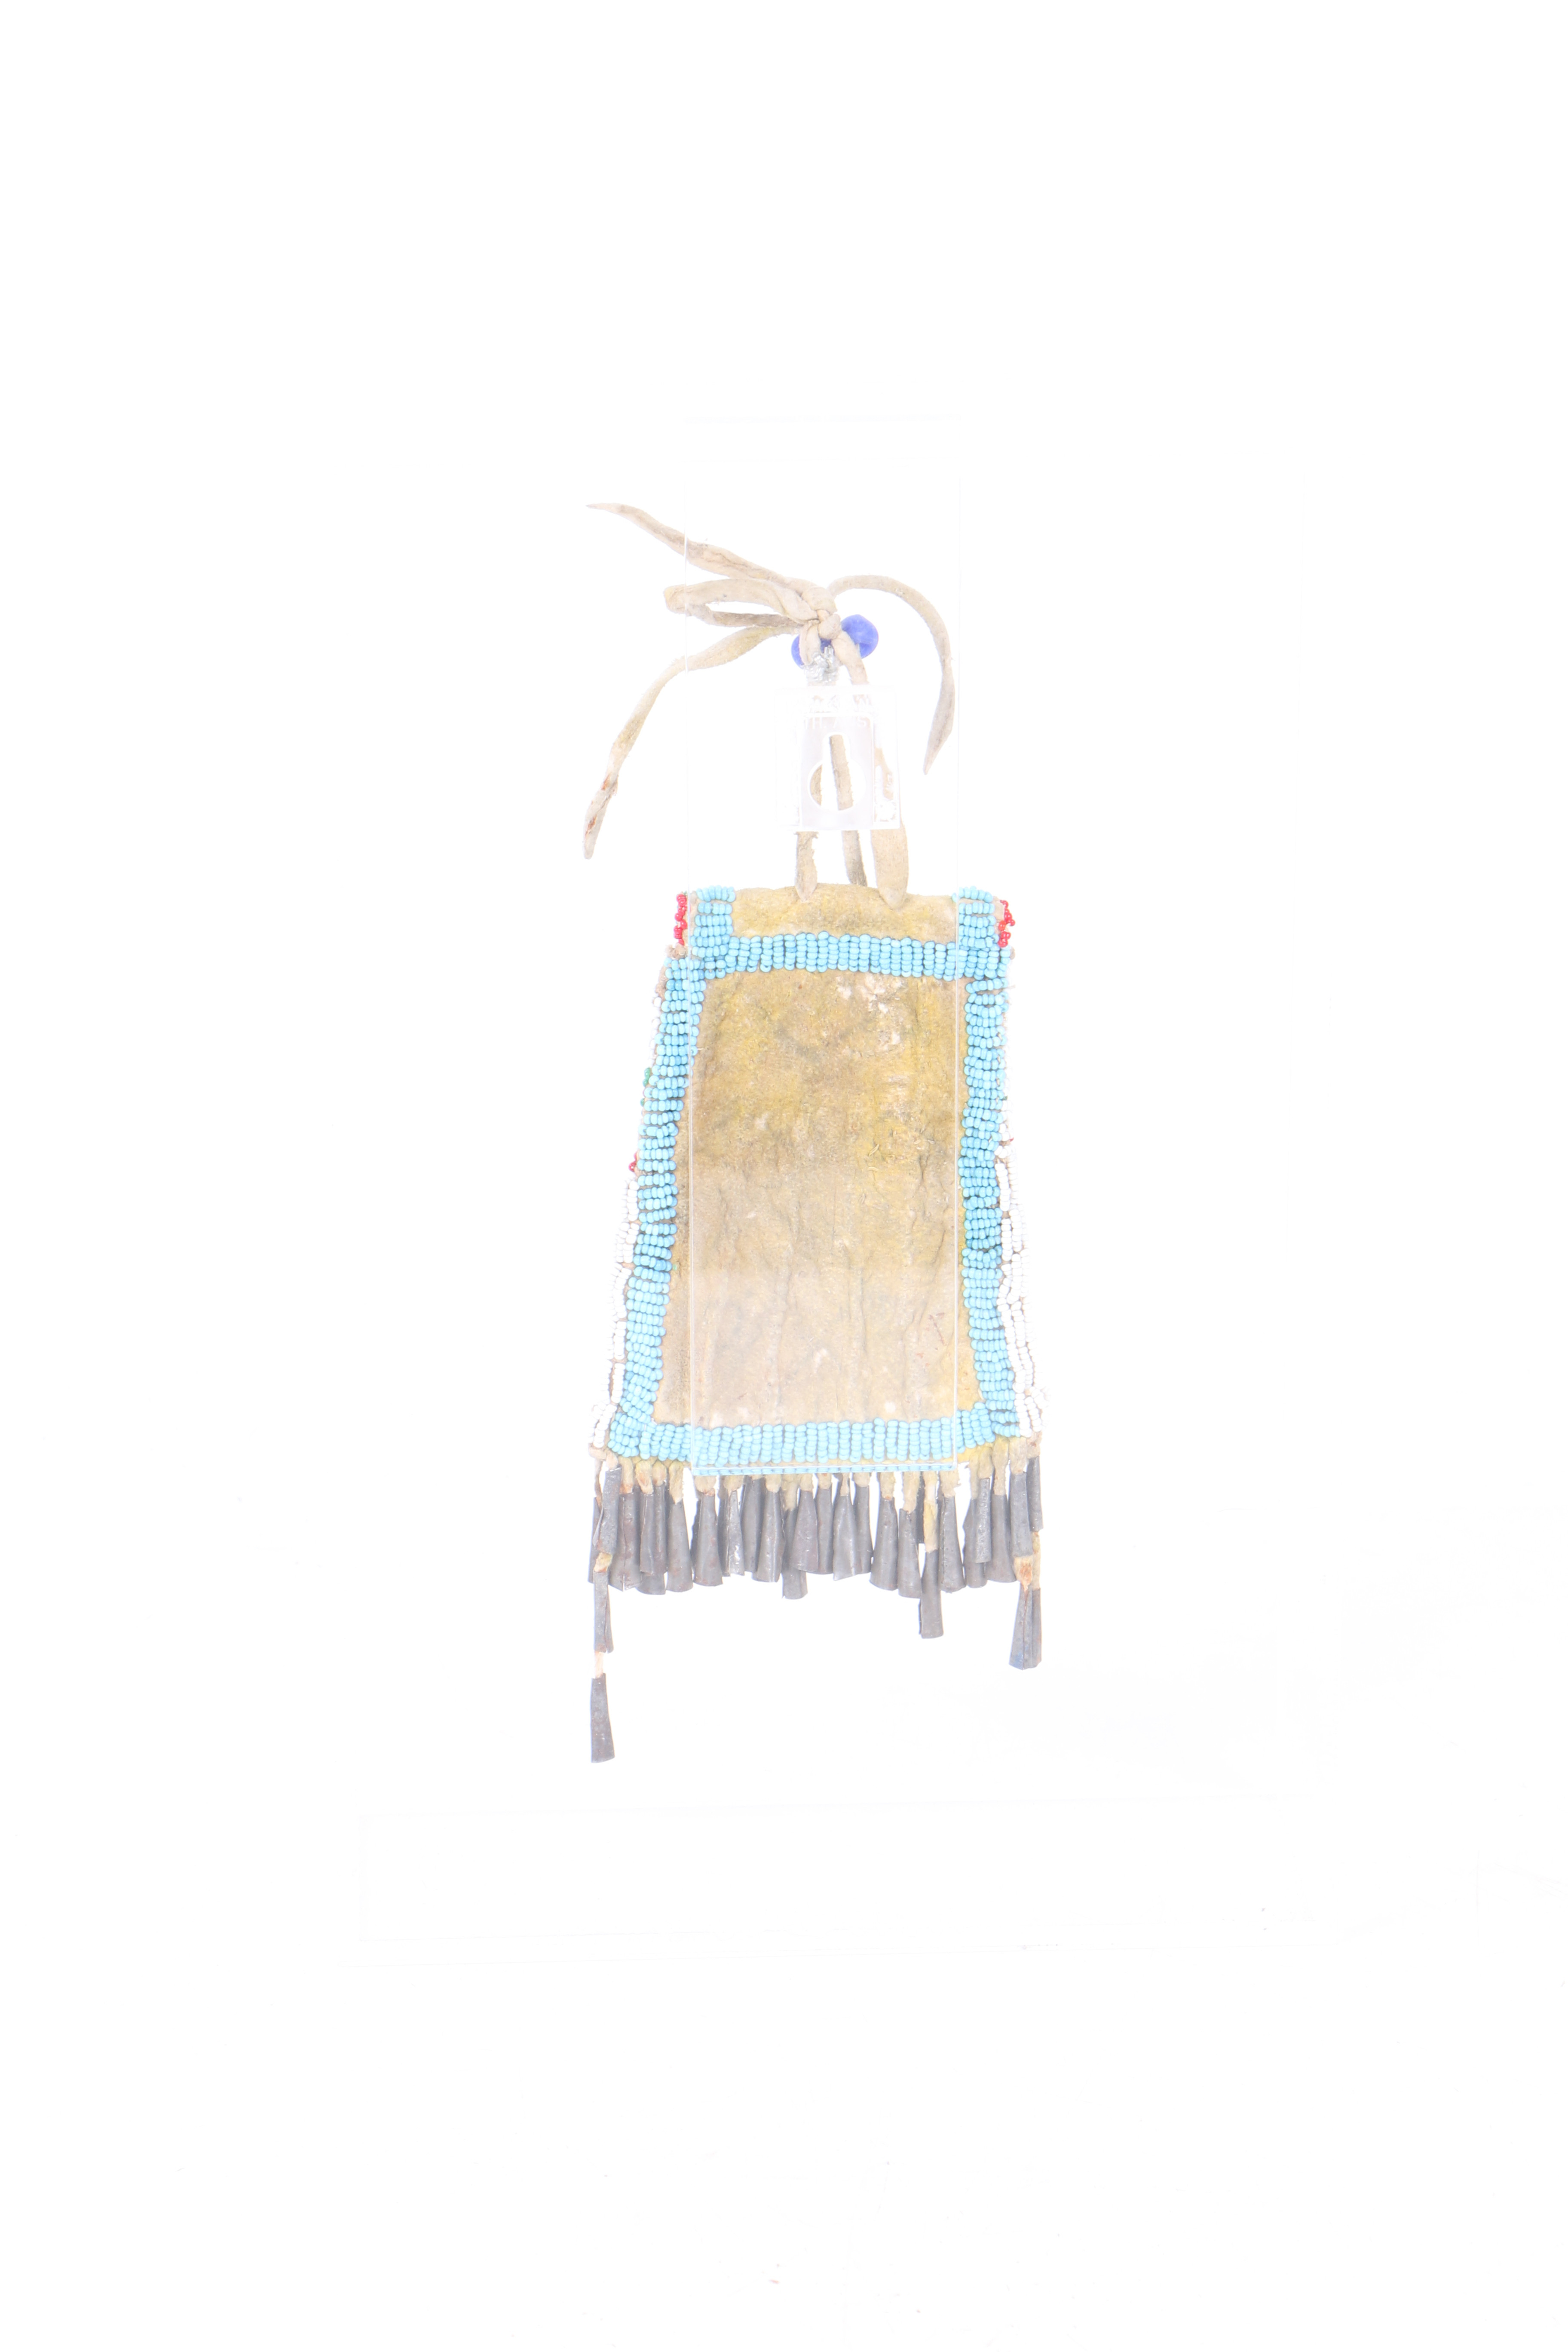 A LAKOTA SIOUX NATIVE AMERICAN BEADED STRIKE-A-LITE POUCH. - Image 3 of 4